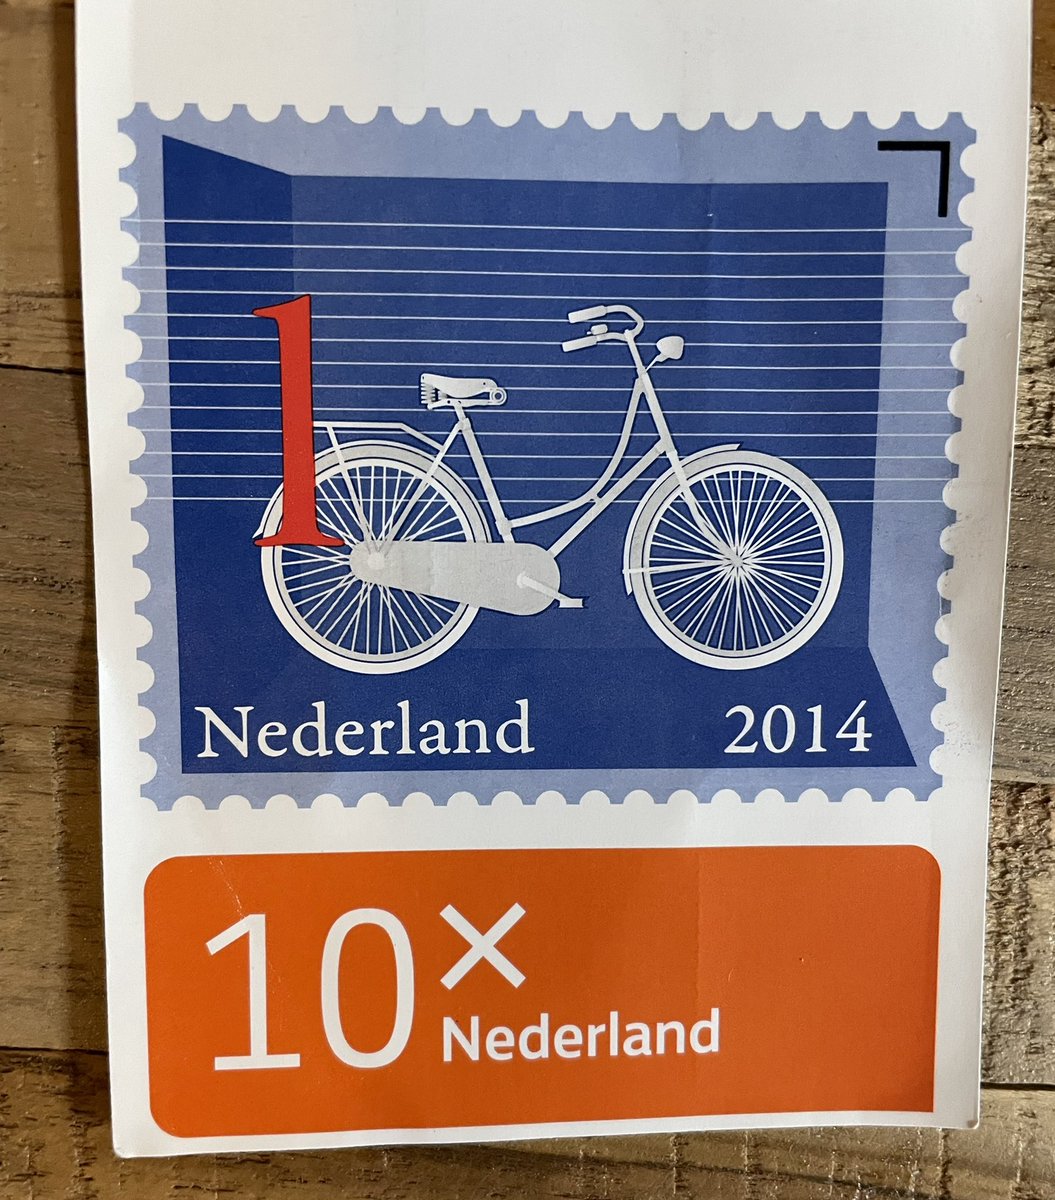 So the Dutch even commemorate bicycles on their postage stamps 🇳🇱🚲🇳🇱🚲🇳🇱🚲